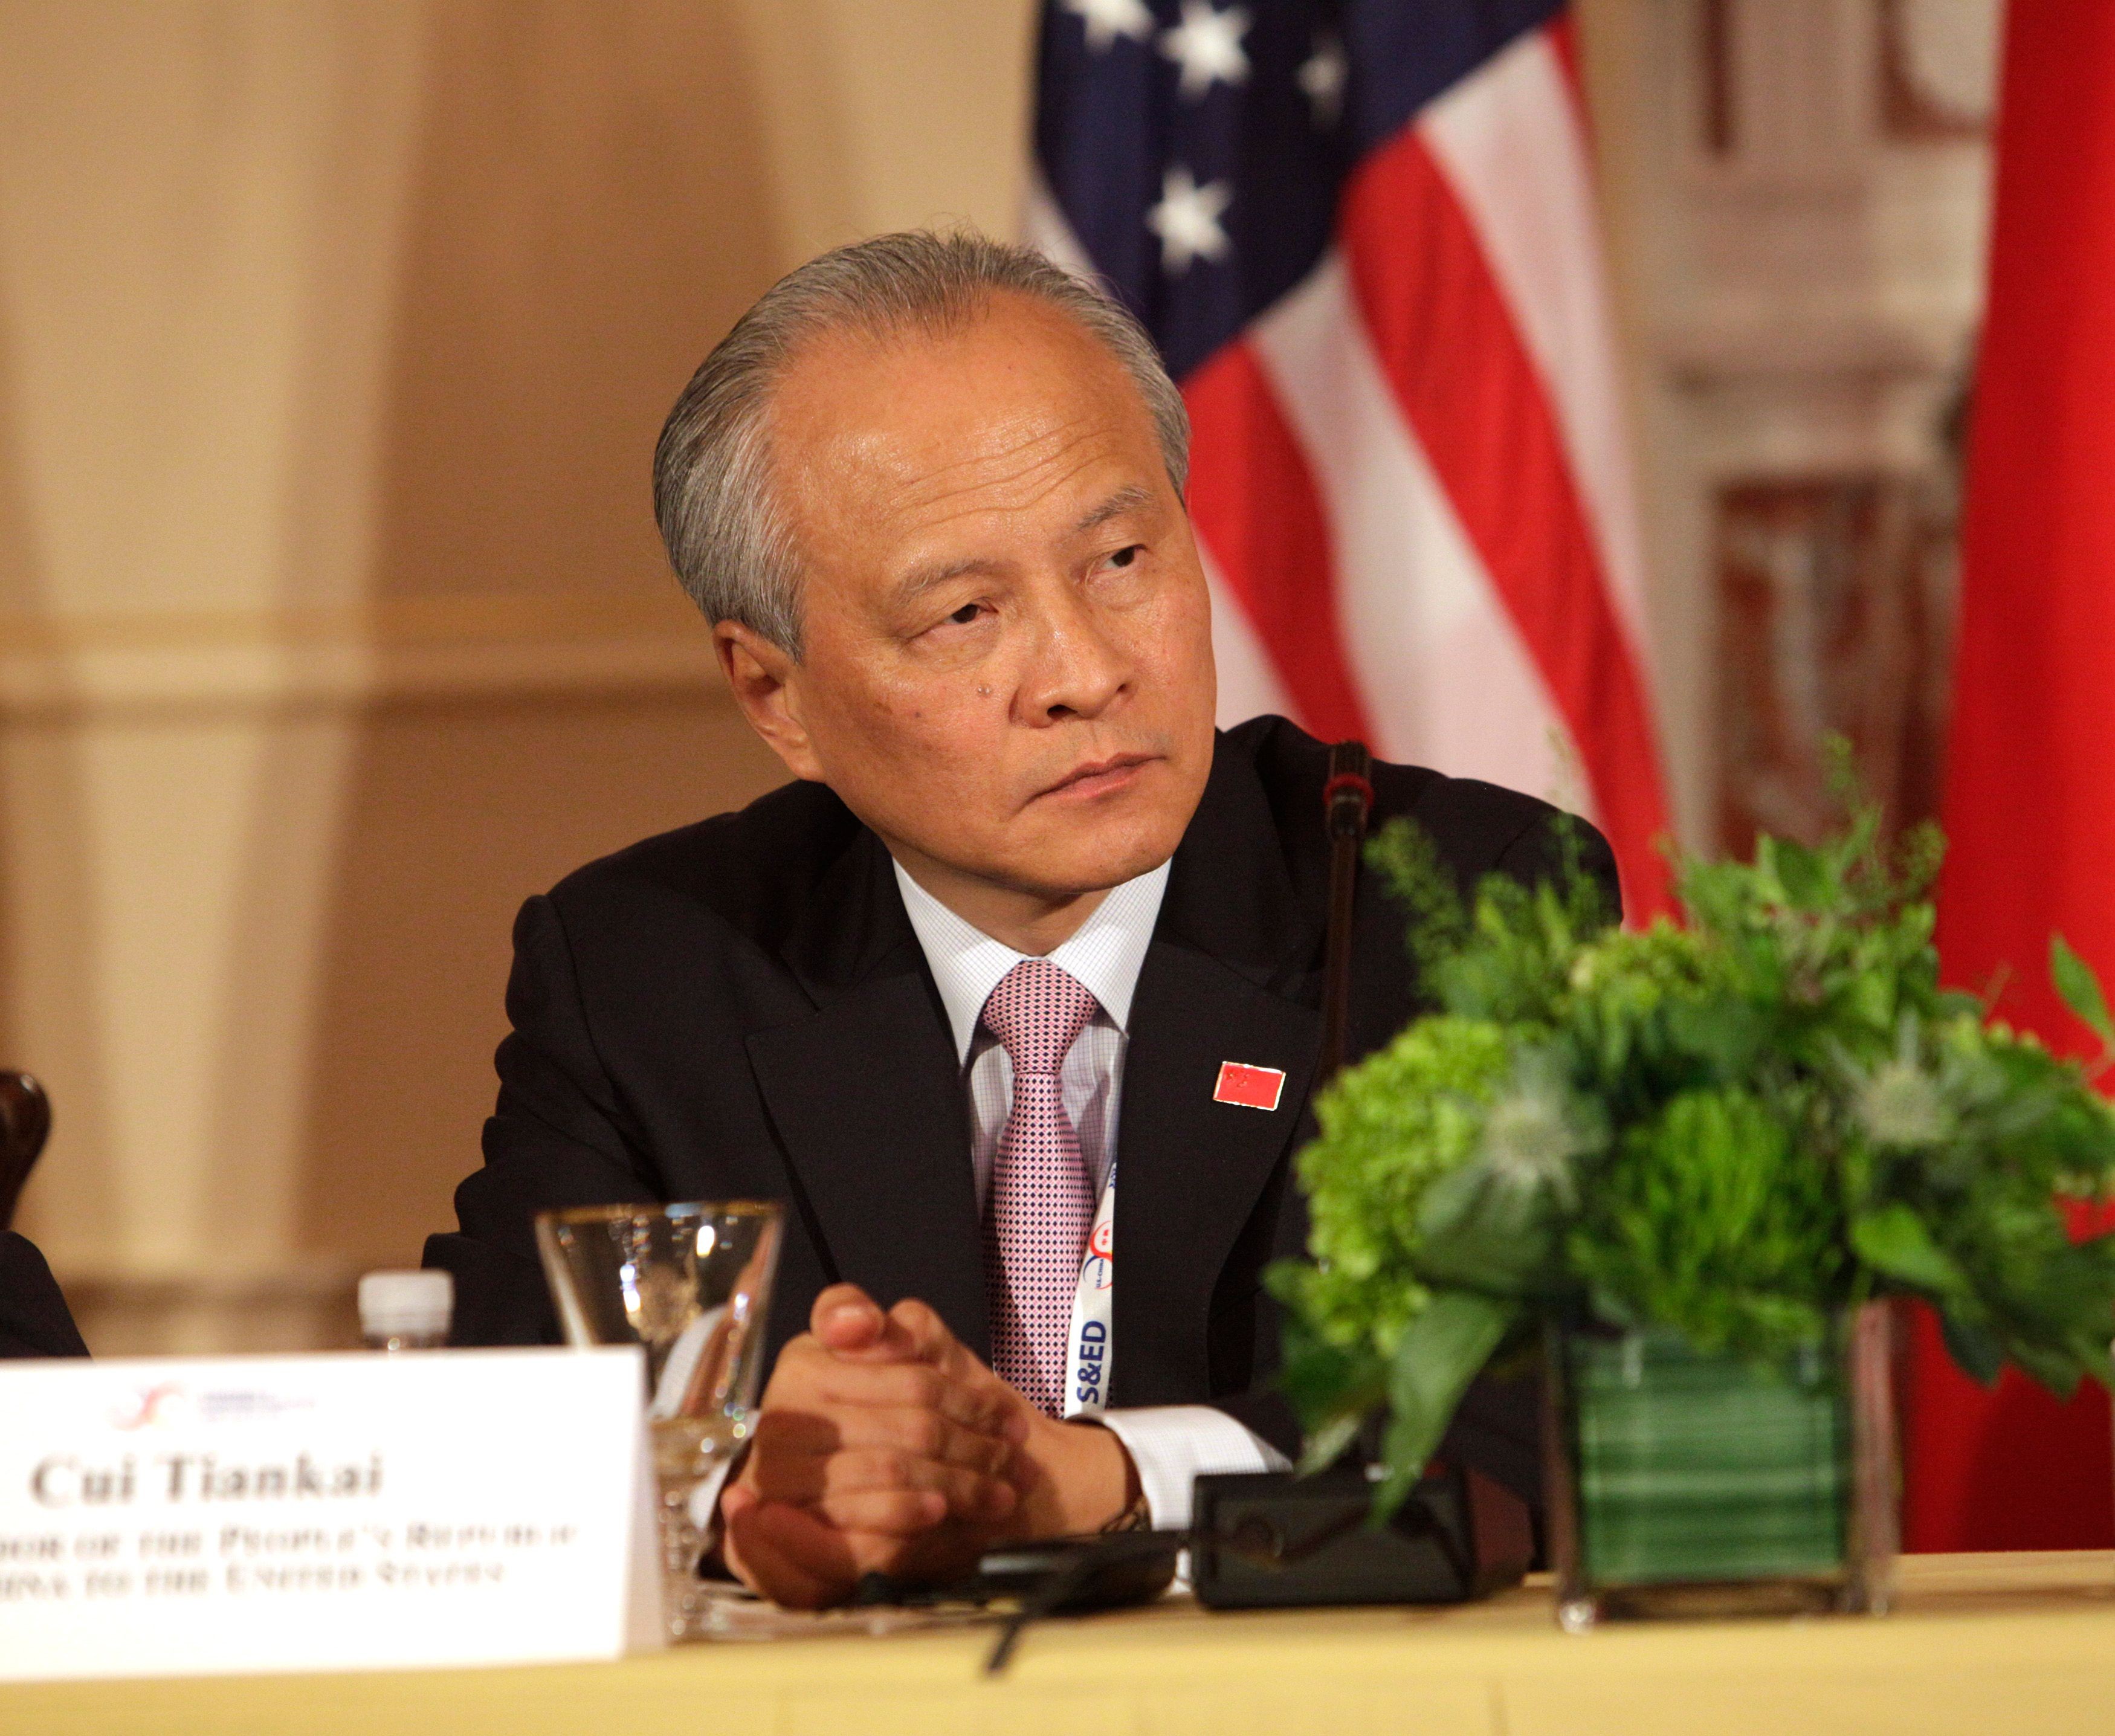 Cui Tiankai was summoned by Washington after other Chinese officials tweeted the conspiracy theory. Photo: AFP